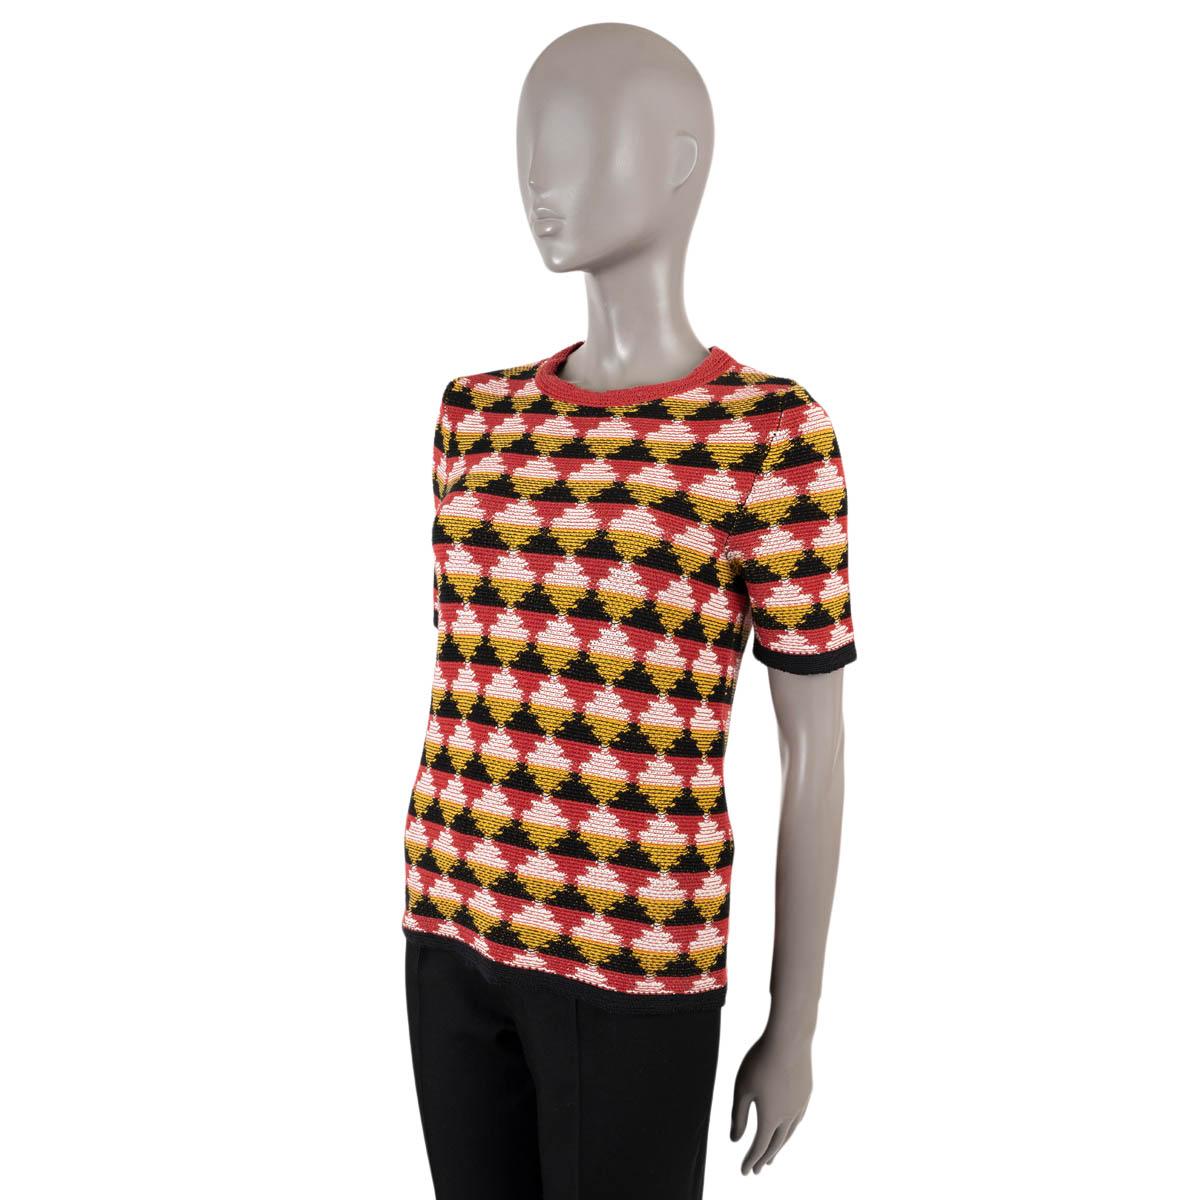 100% authentic Bottega Veneta jacquared knit T-shirt in red, yellow, black and white cotton (with 7% polyamide). Features a round neck and short sleeves. Has been worn and is in excellent condition. 

Measurements
Tag Size	40
Size	S
Shoulder